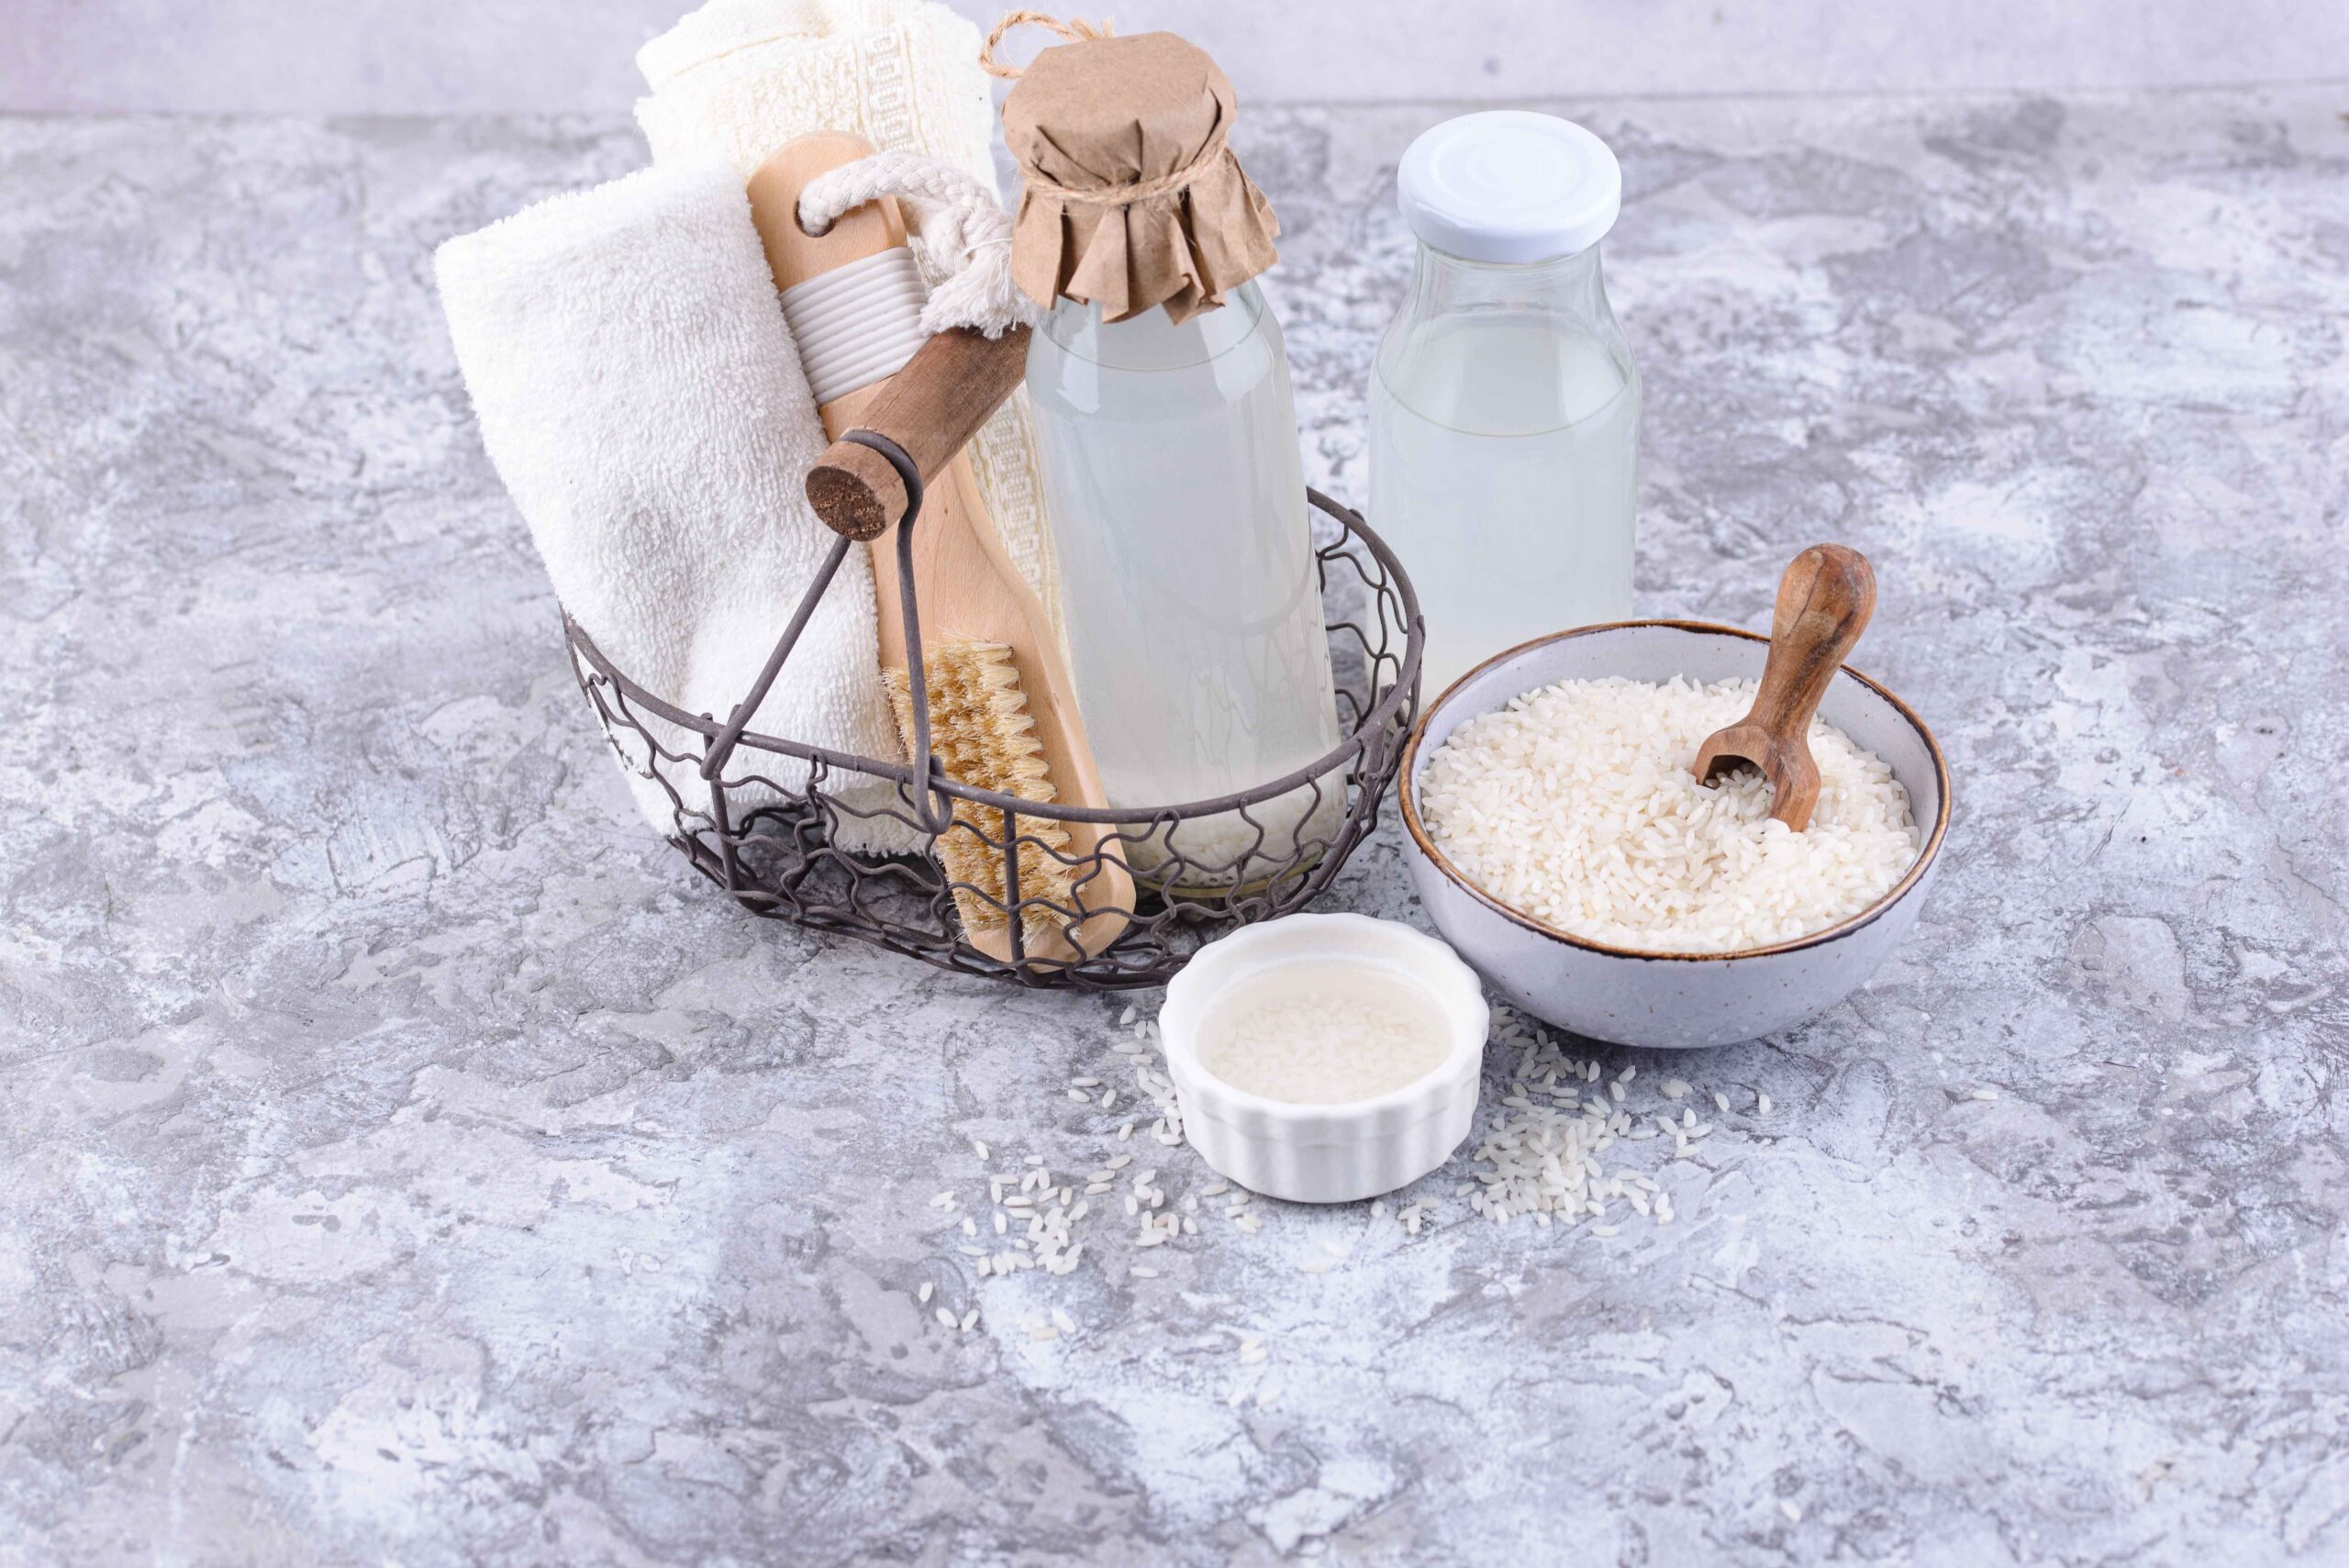 AYURVEDIC DOCTOR EXPLAINS HOW TO USE RICE WATER FOR BEAUTY CARE